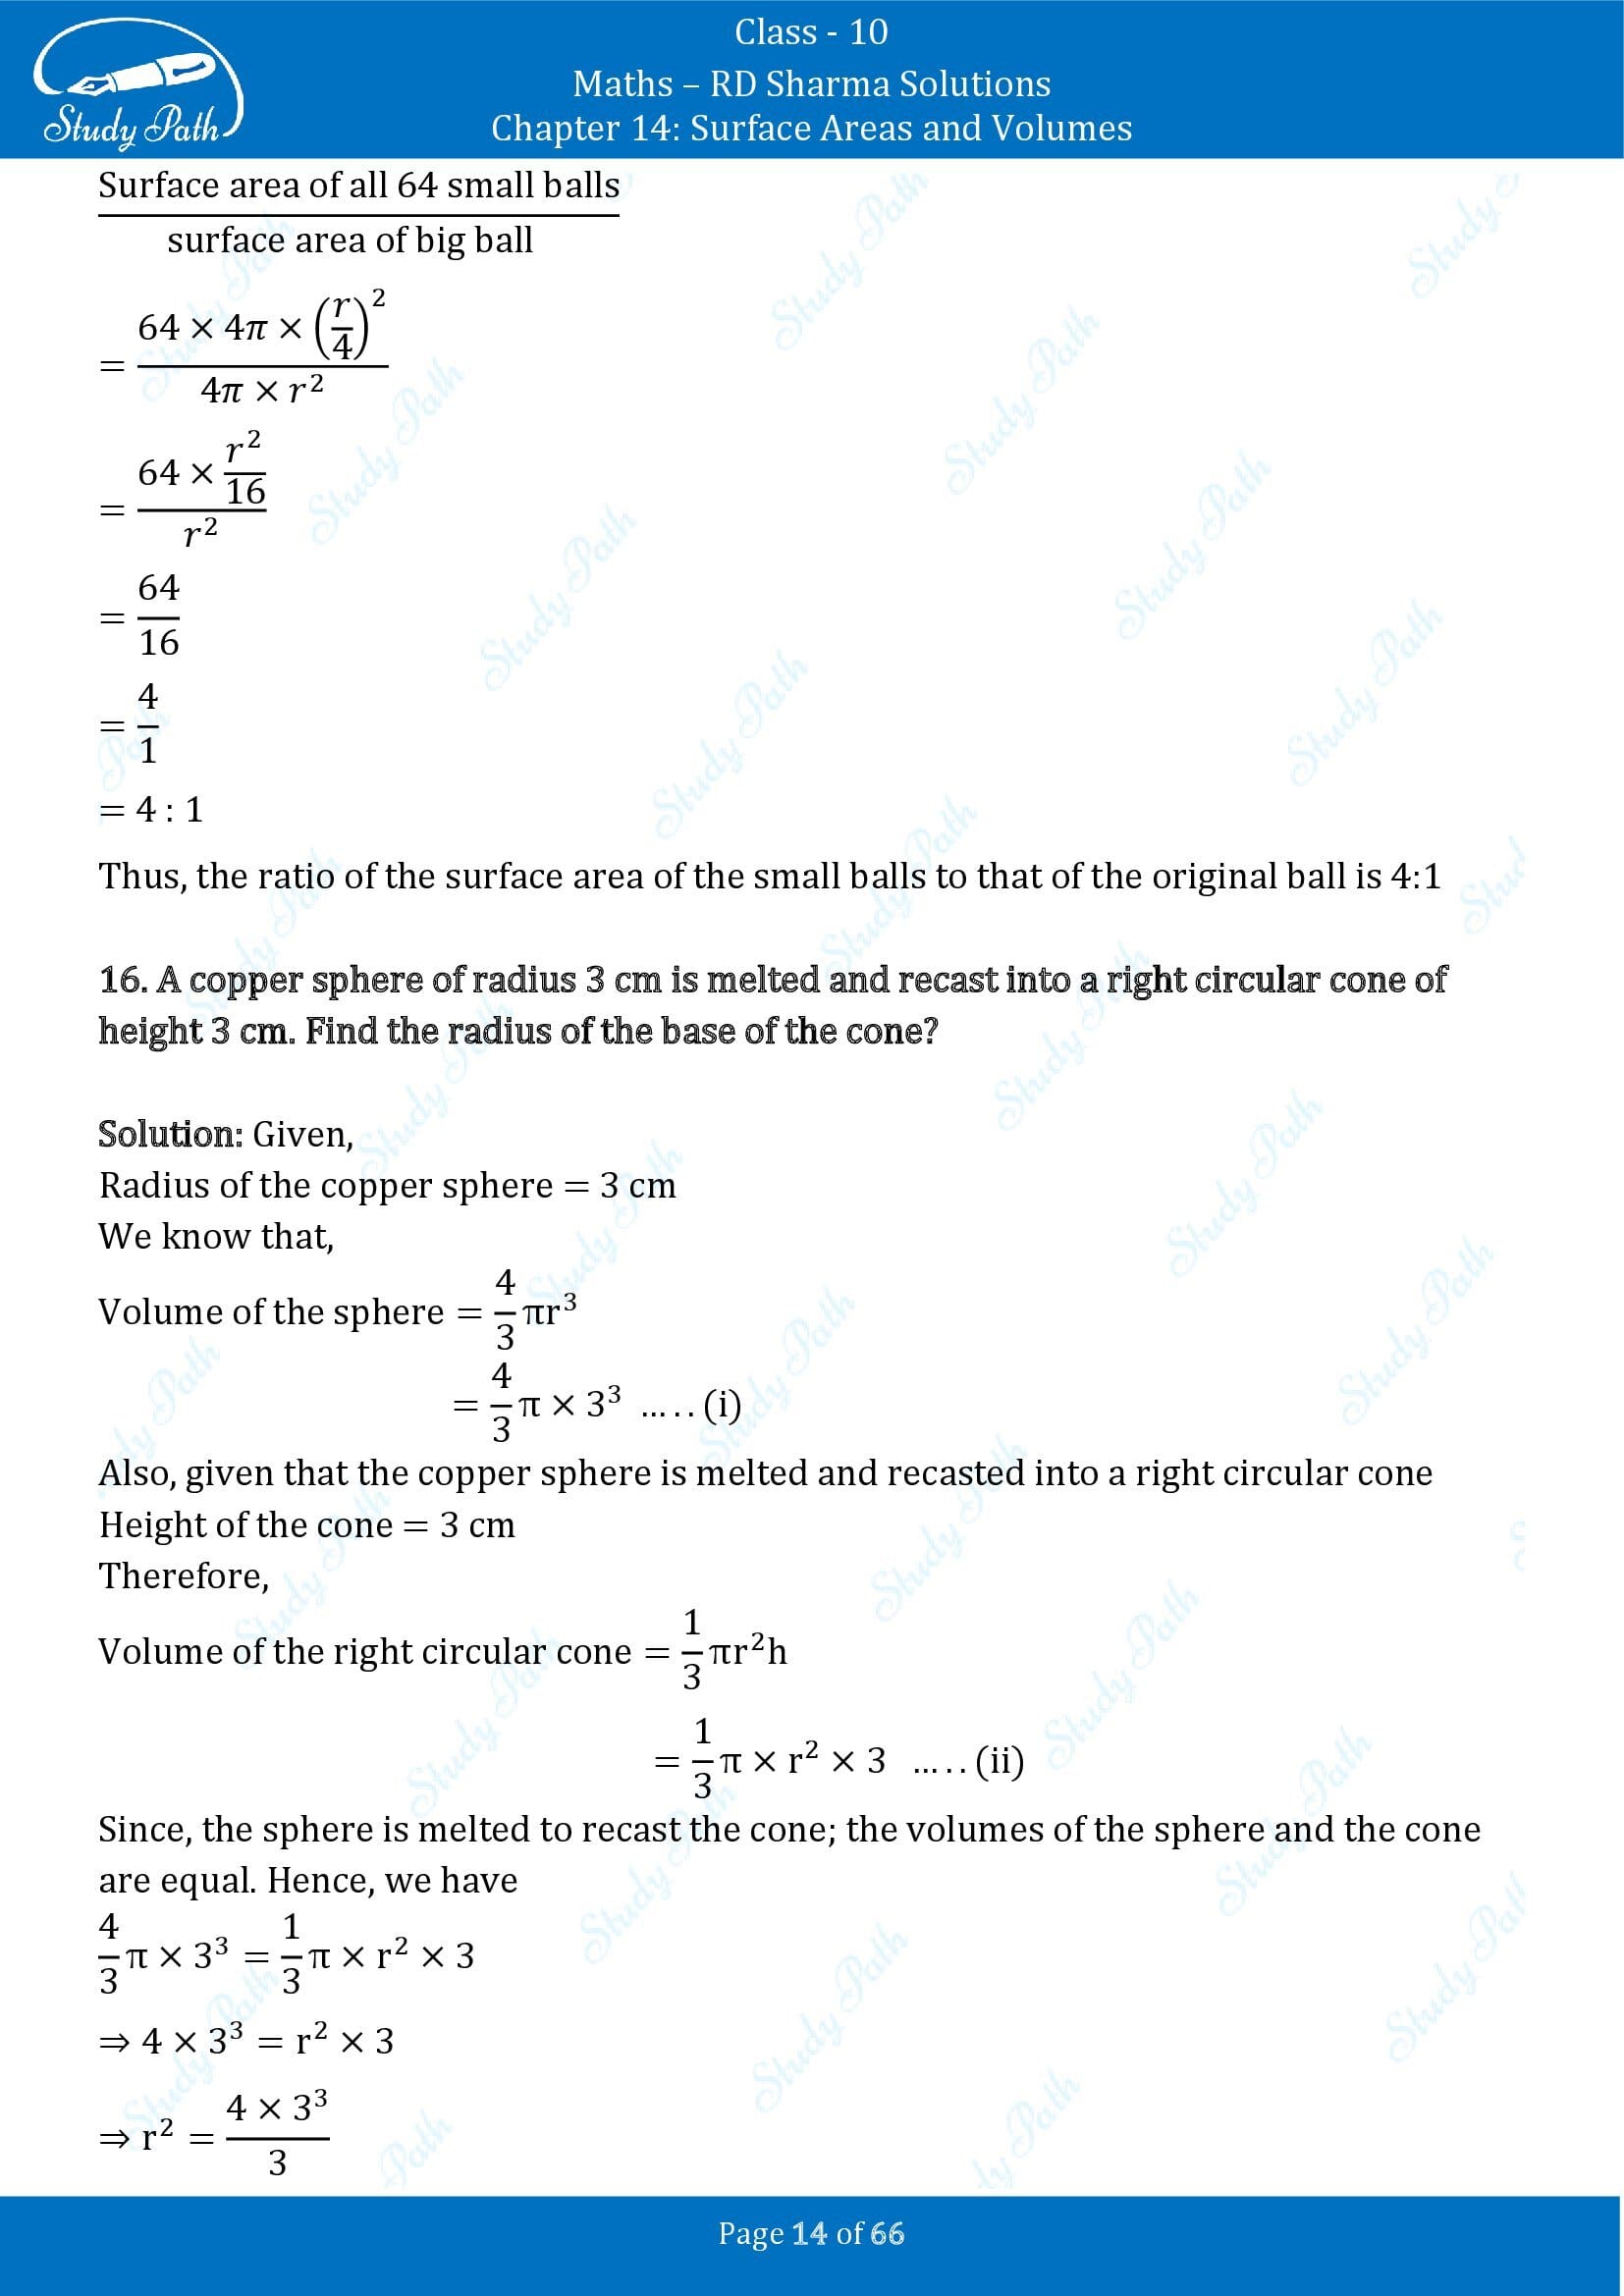 RD Sharma Solutions Class 10 Chapter 14 Surface Areas and Volumes Exercise 14.1 00014